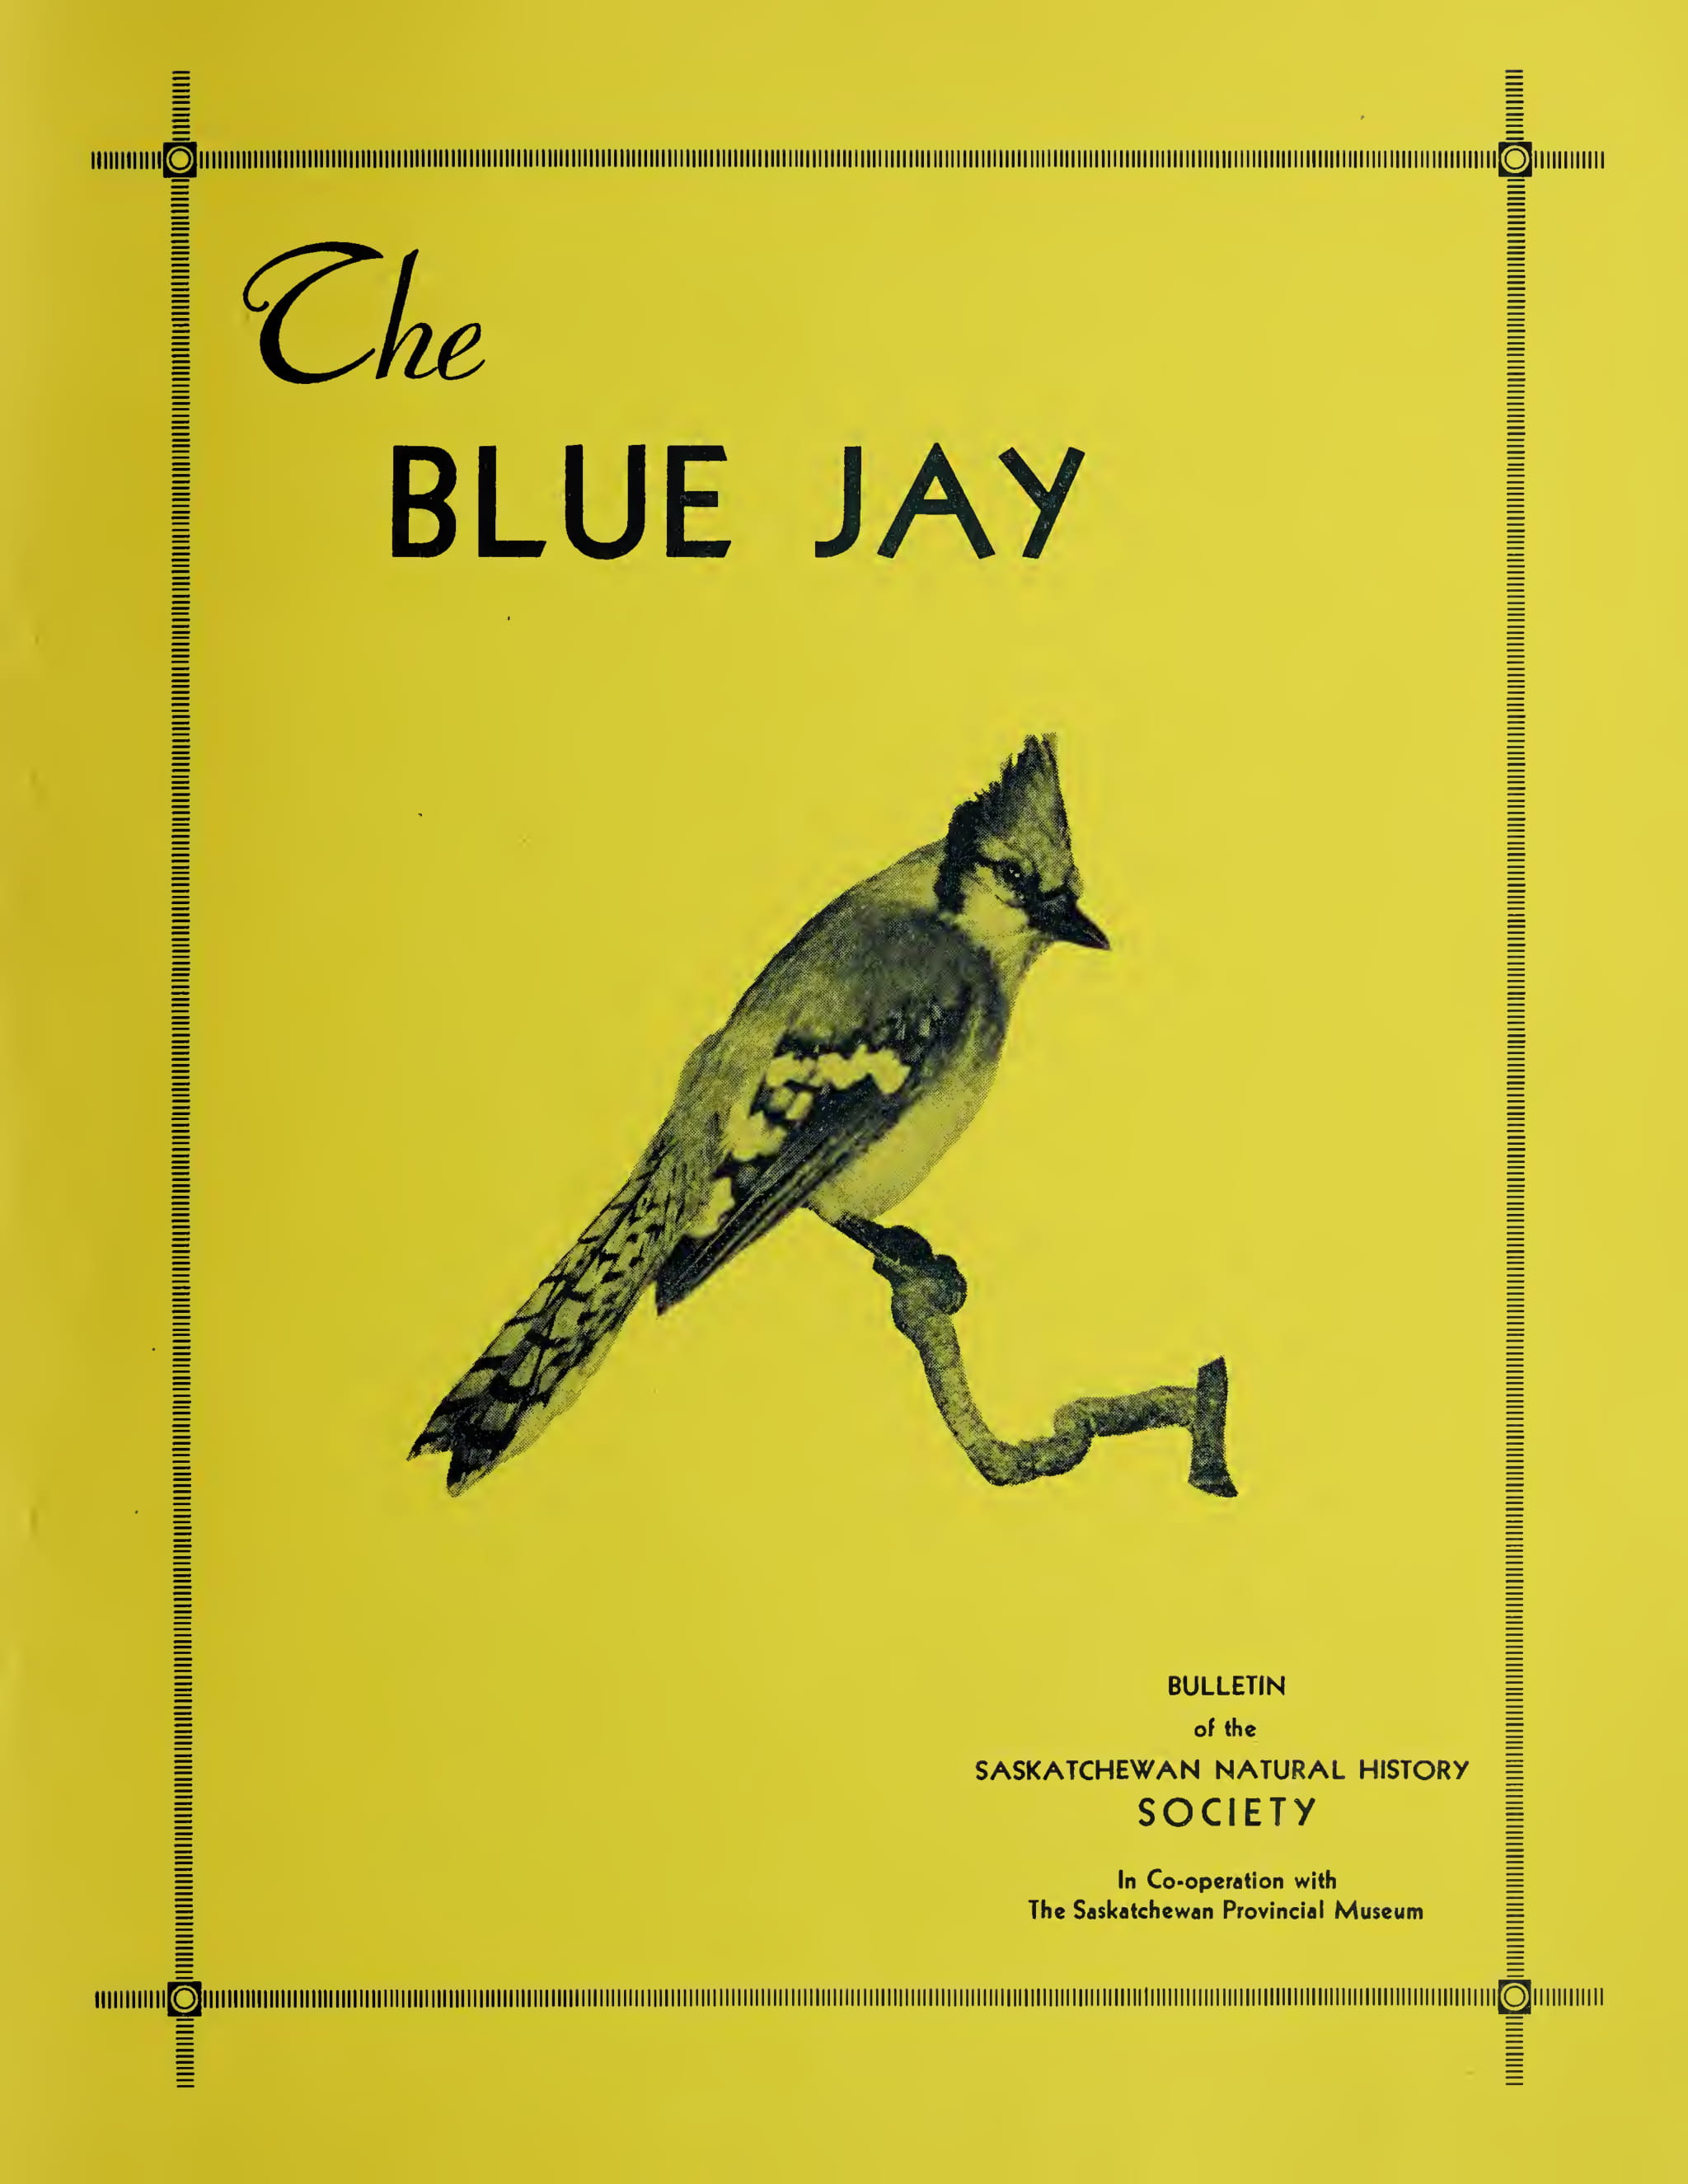 Cover Image for Spring 1949